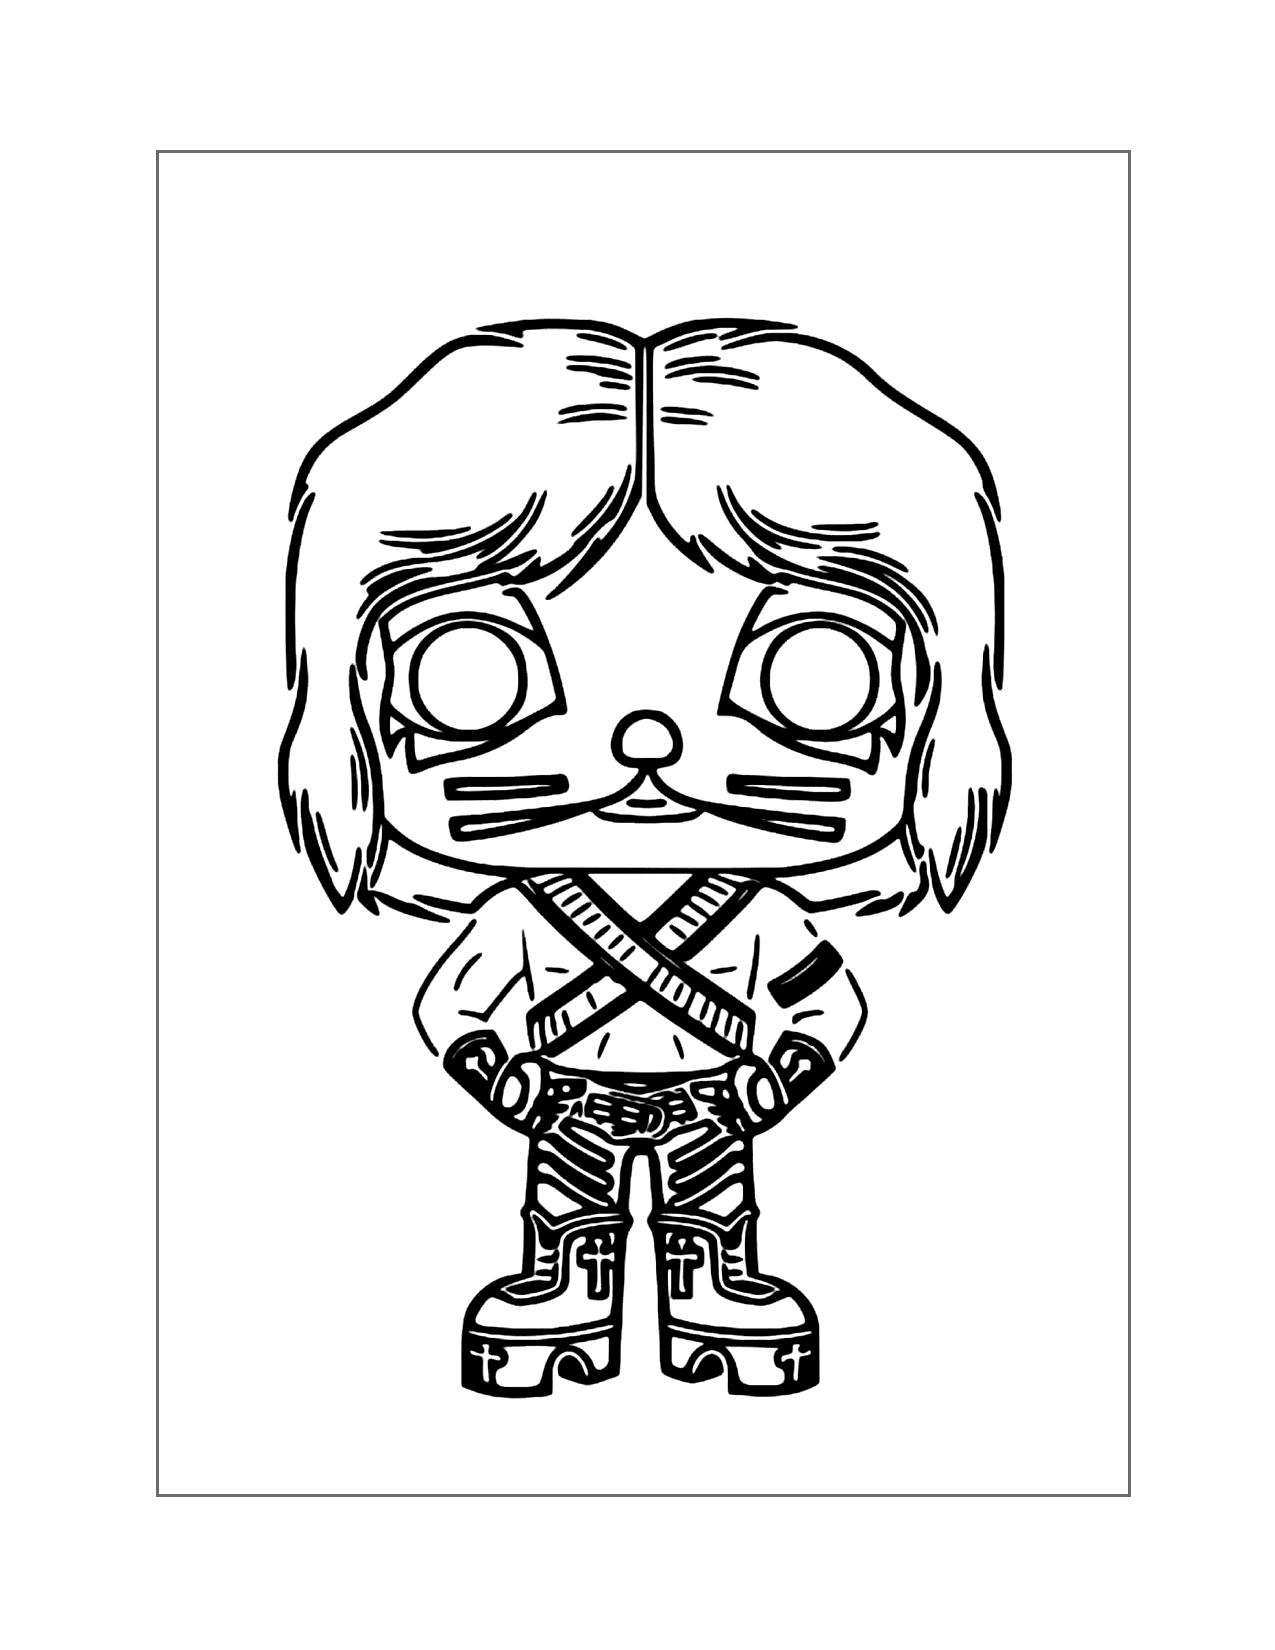 The Catman Peter Kriss Kiss Funko Pop Coloring Page